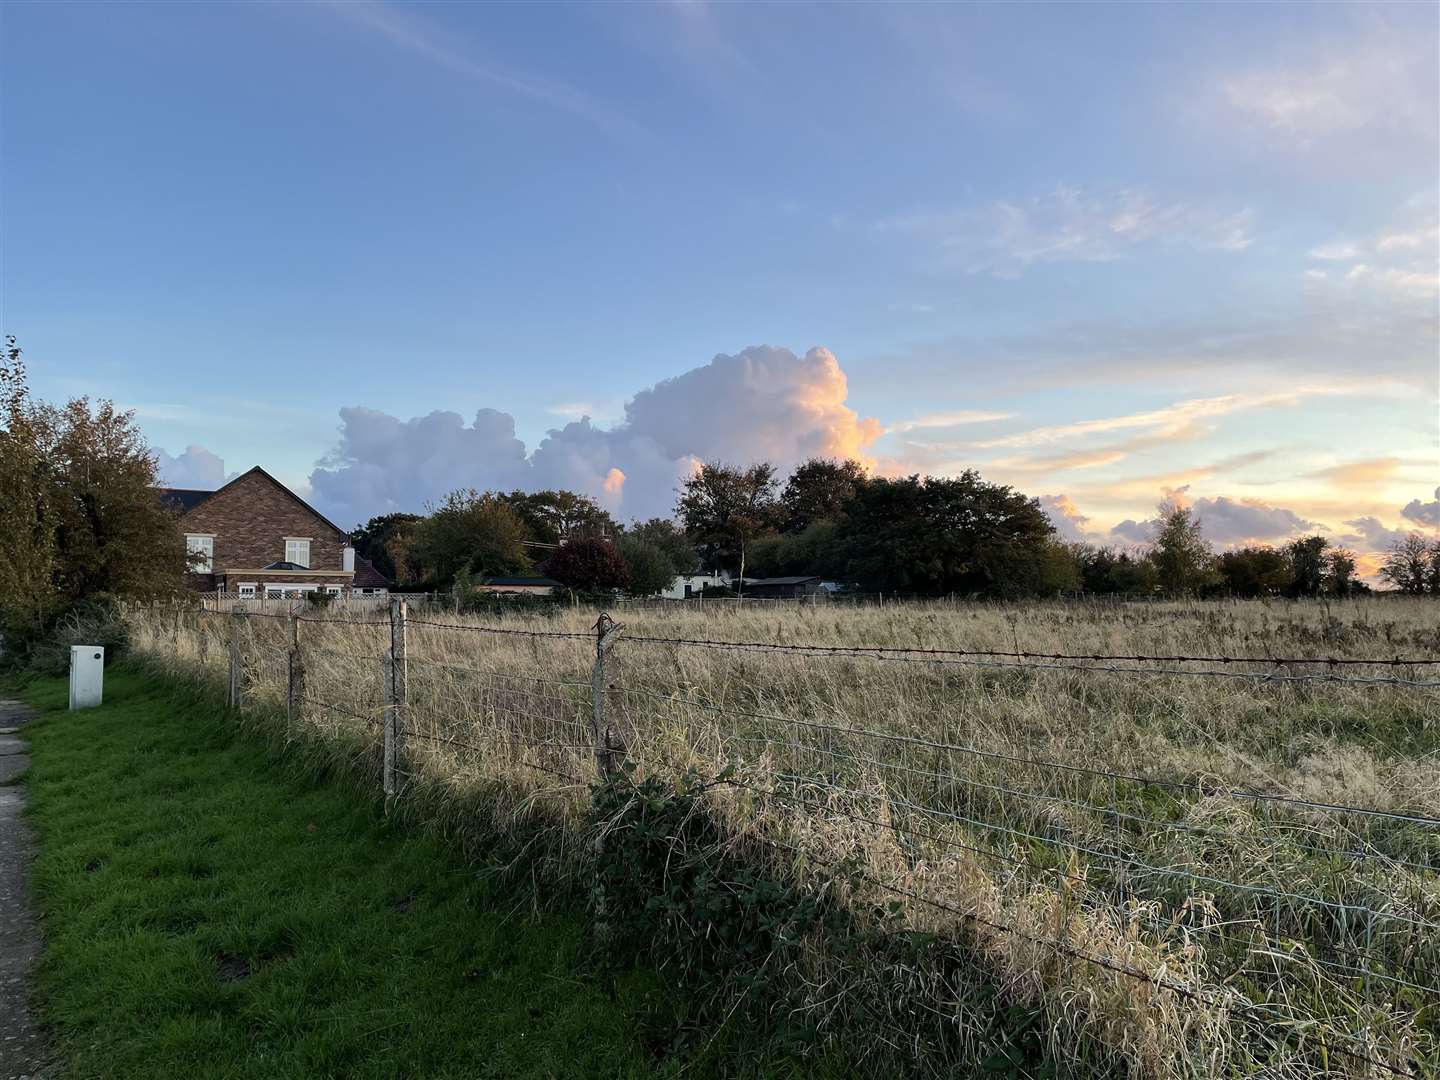 An initial development of 110 homes has already been approved next door to the new site